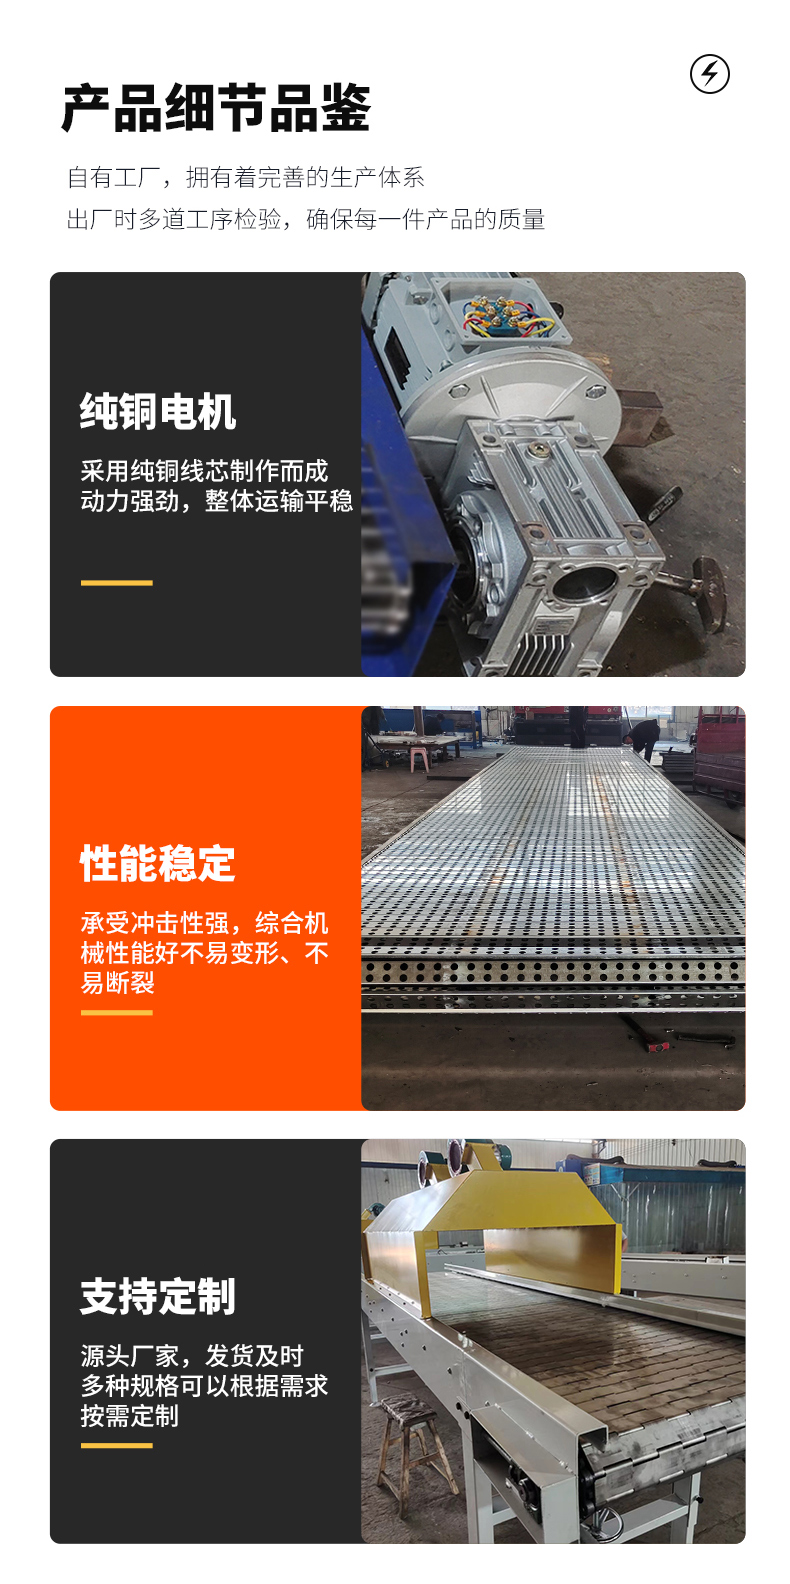 Air cooled cleaning and sterilization light chain conveyor food cooling assembly line transmission device Xinshuntong